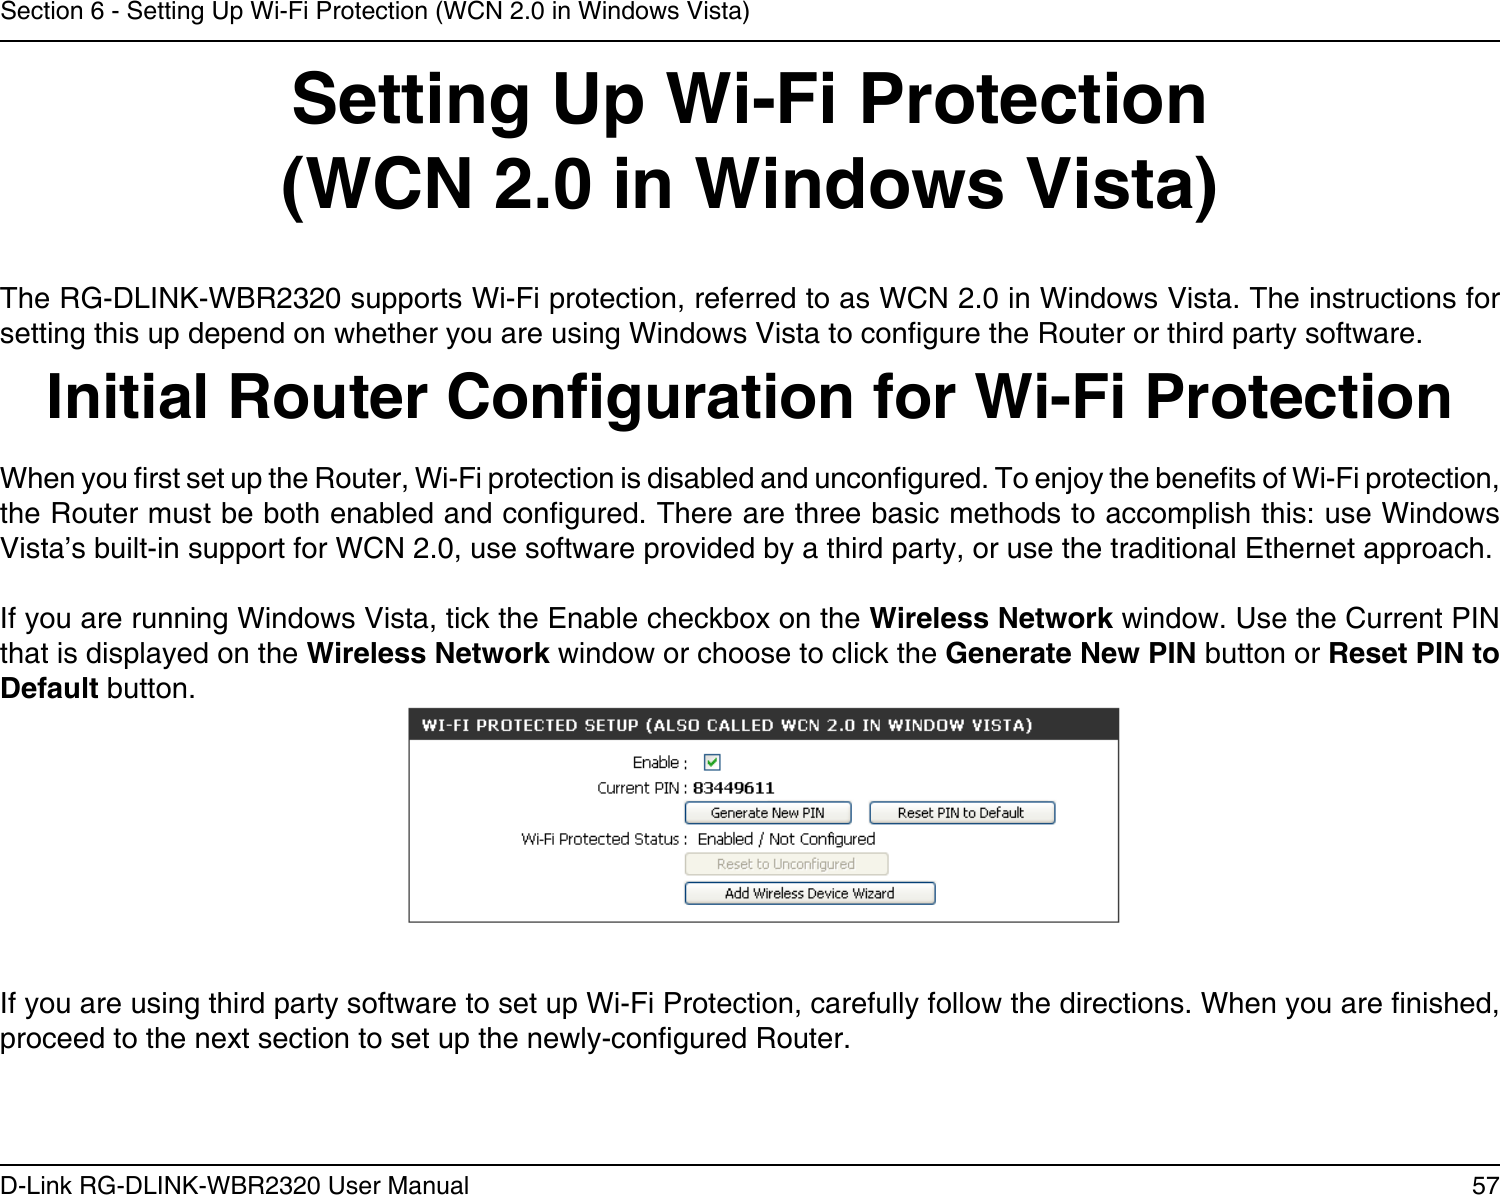 57D-Link RG-DLINK-WBR2320 User ManualSection 6 - Setting Up Wi-Fi Protection (WCN 2.0 in Windows Vista)Setting Up Wi-Fi Protection(WCN 2.0 in Windows Vista)The RG-DLINK-WBR2320 supports Wi-Fi protection, referred to as WCN 2.0 in Windows Vista. The instructions for setting this up depend on whether you are using Windows Vista to congure the Router or third party software.        Initial Router Conguration for Wi-Fi ProtectionWhen you rst set up the Router, Wi-Fi protection is disabled and uncongured. To enjoy the benets of Wi-Fi protection, the Router must be both enabled and congured. There are three basic methods to accomplish this: use Windows Vista’s built-in support for WCN 2.0, use software provided by a third party, or use the traditional Ethernet approach. If you are running Windows Vista, tick the Enable checkbox on the Wireless Network window. Use the Current PIN that is displayed on the Wireless Network window or choose to click the Generate New PIN button or Reset PIN to Default button. If you are using third party software to set up Wi-Fi Protection, carefully follow the directions. When you are nished, proceed to the next section to set up the newly-congured Router. 